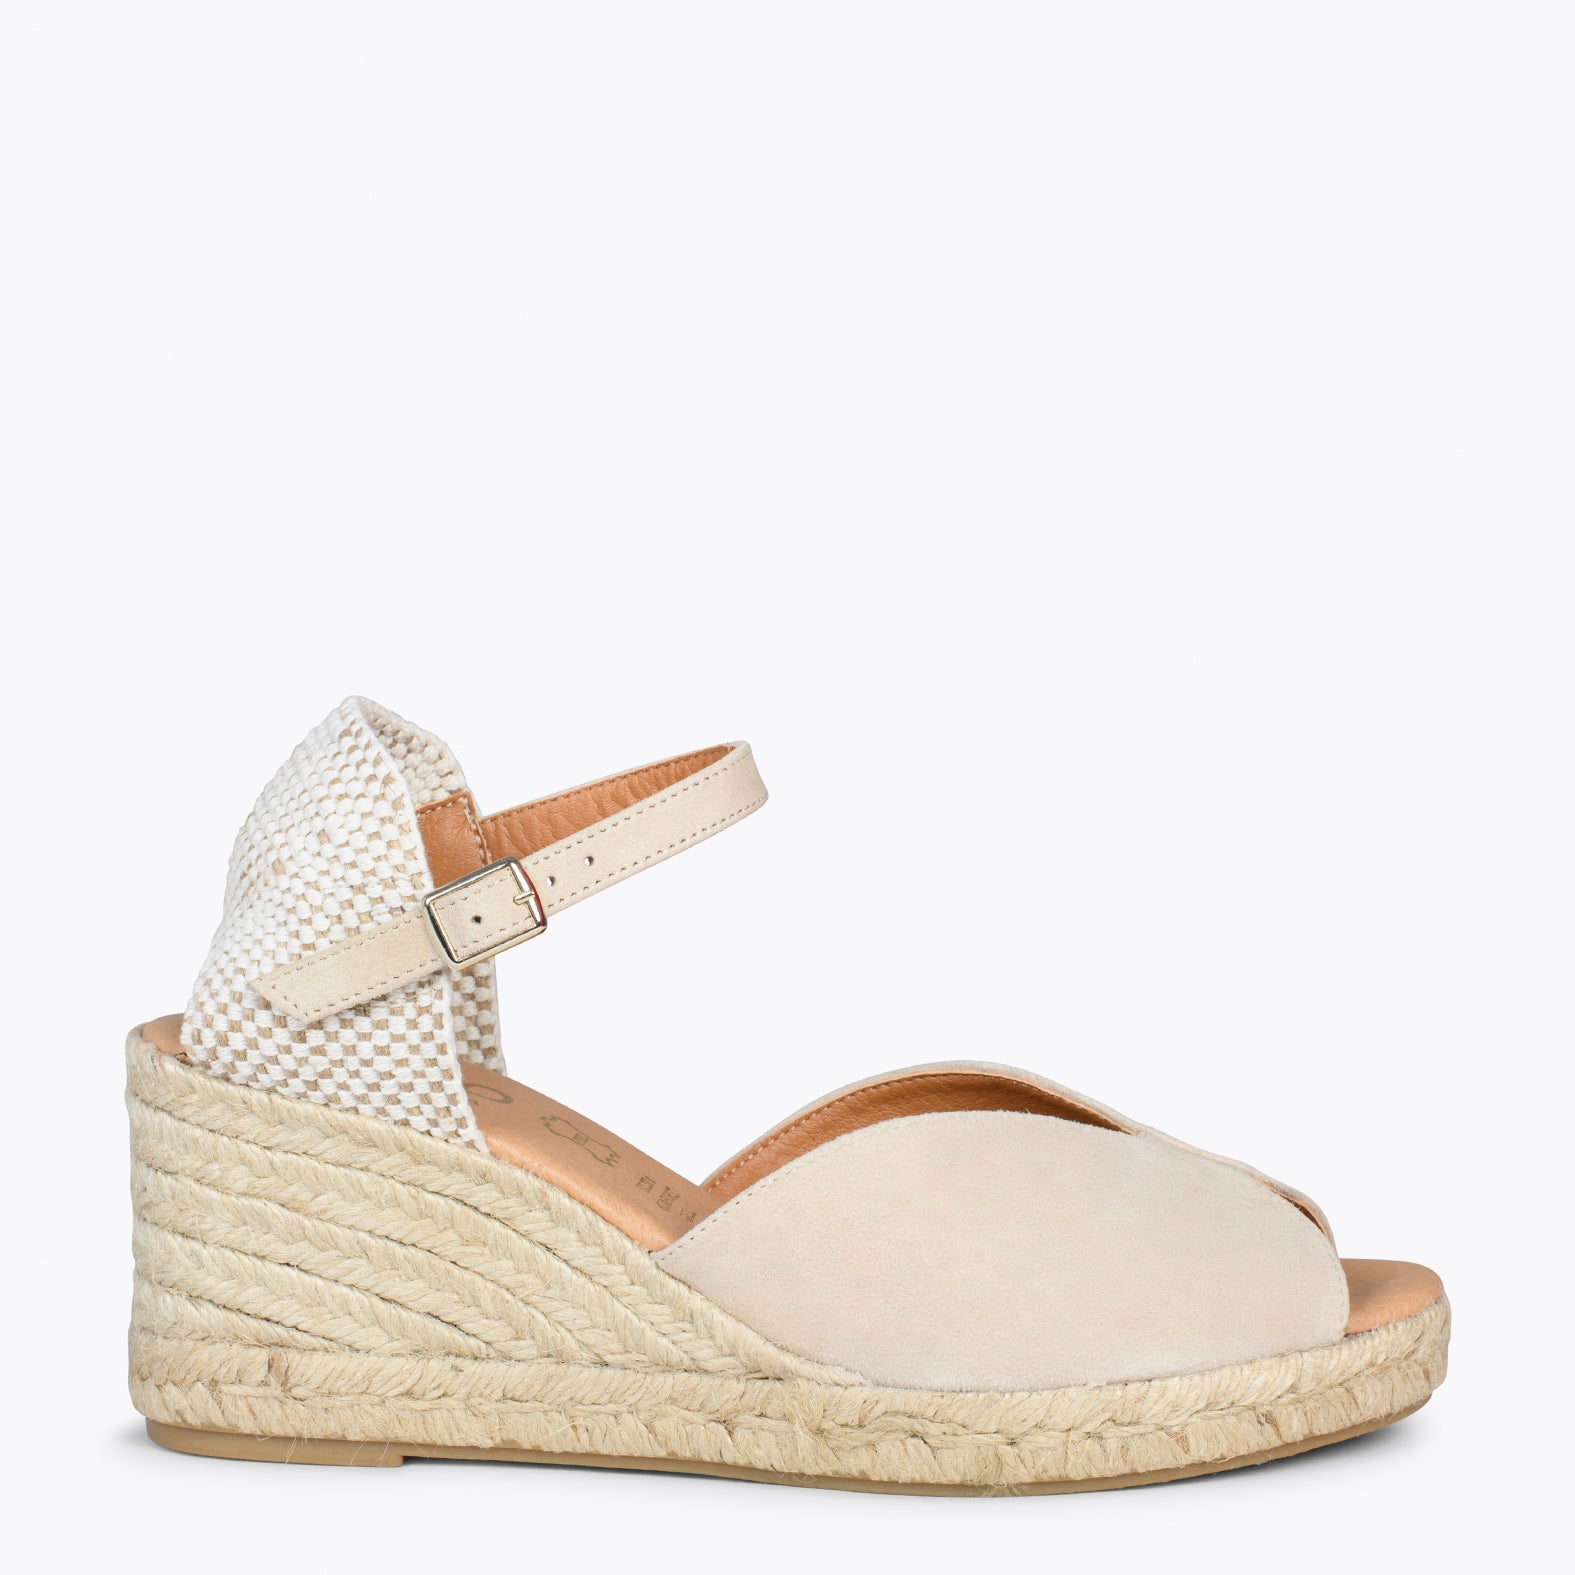 SITGES – BEIGE espadrille wedges with double shovel